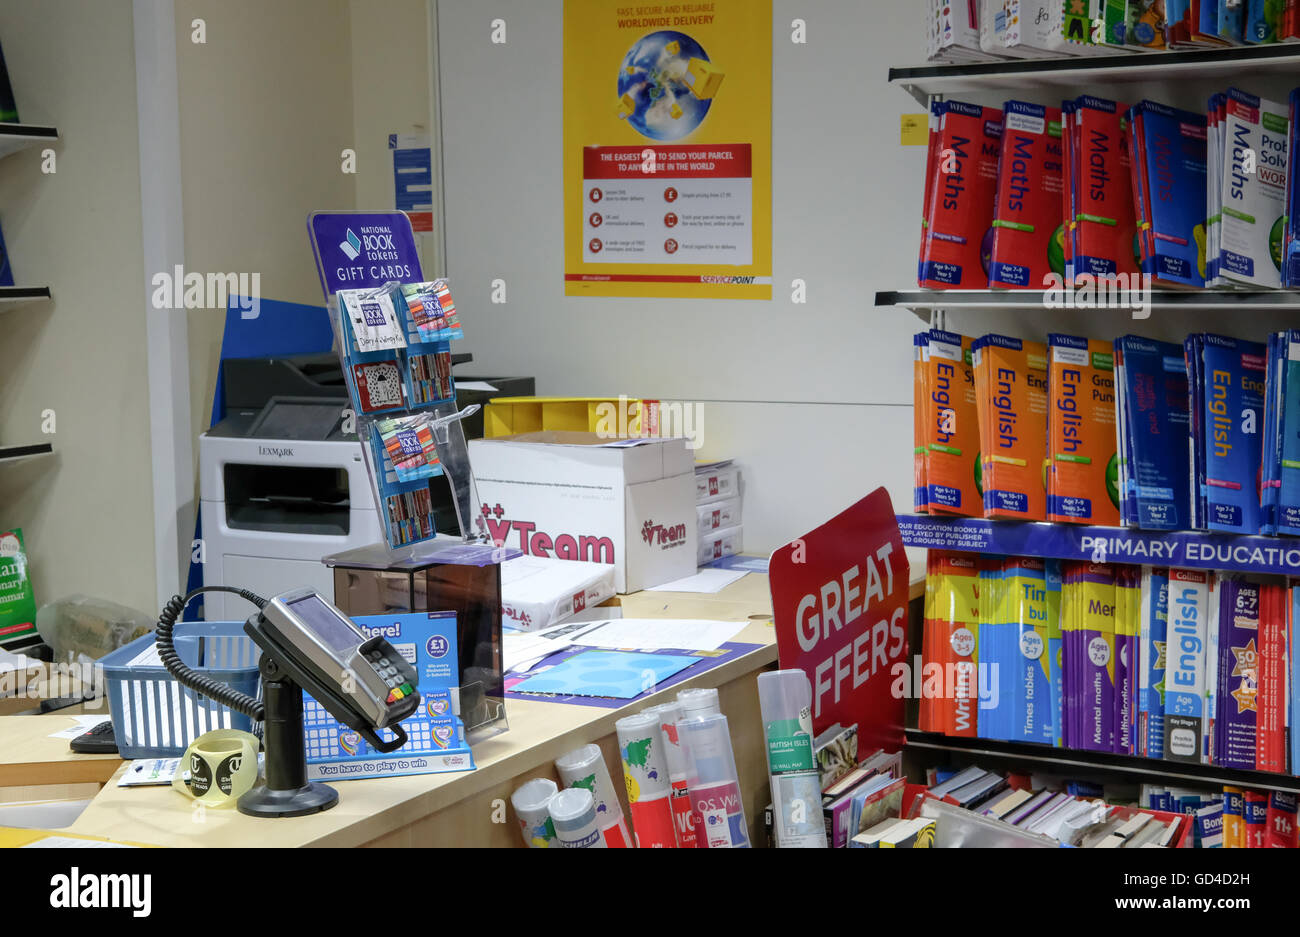 Retail service area of a high street newsagent type company. In view is a PDQ machine and various retail products, books etc. Stock Photo